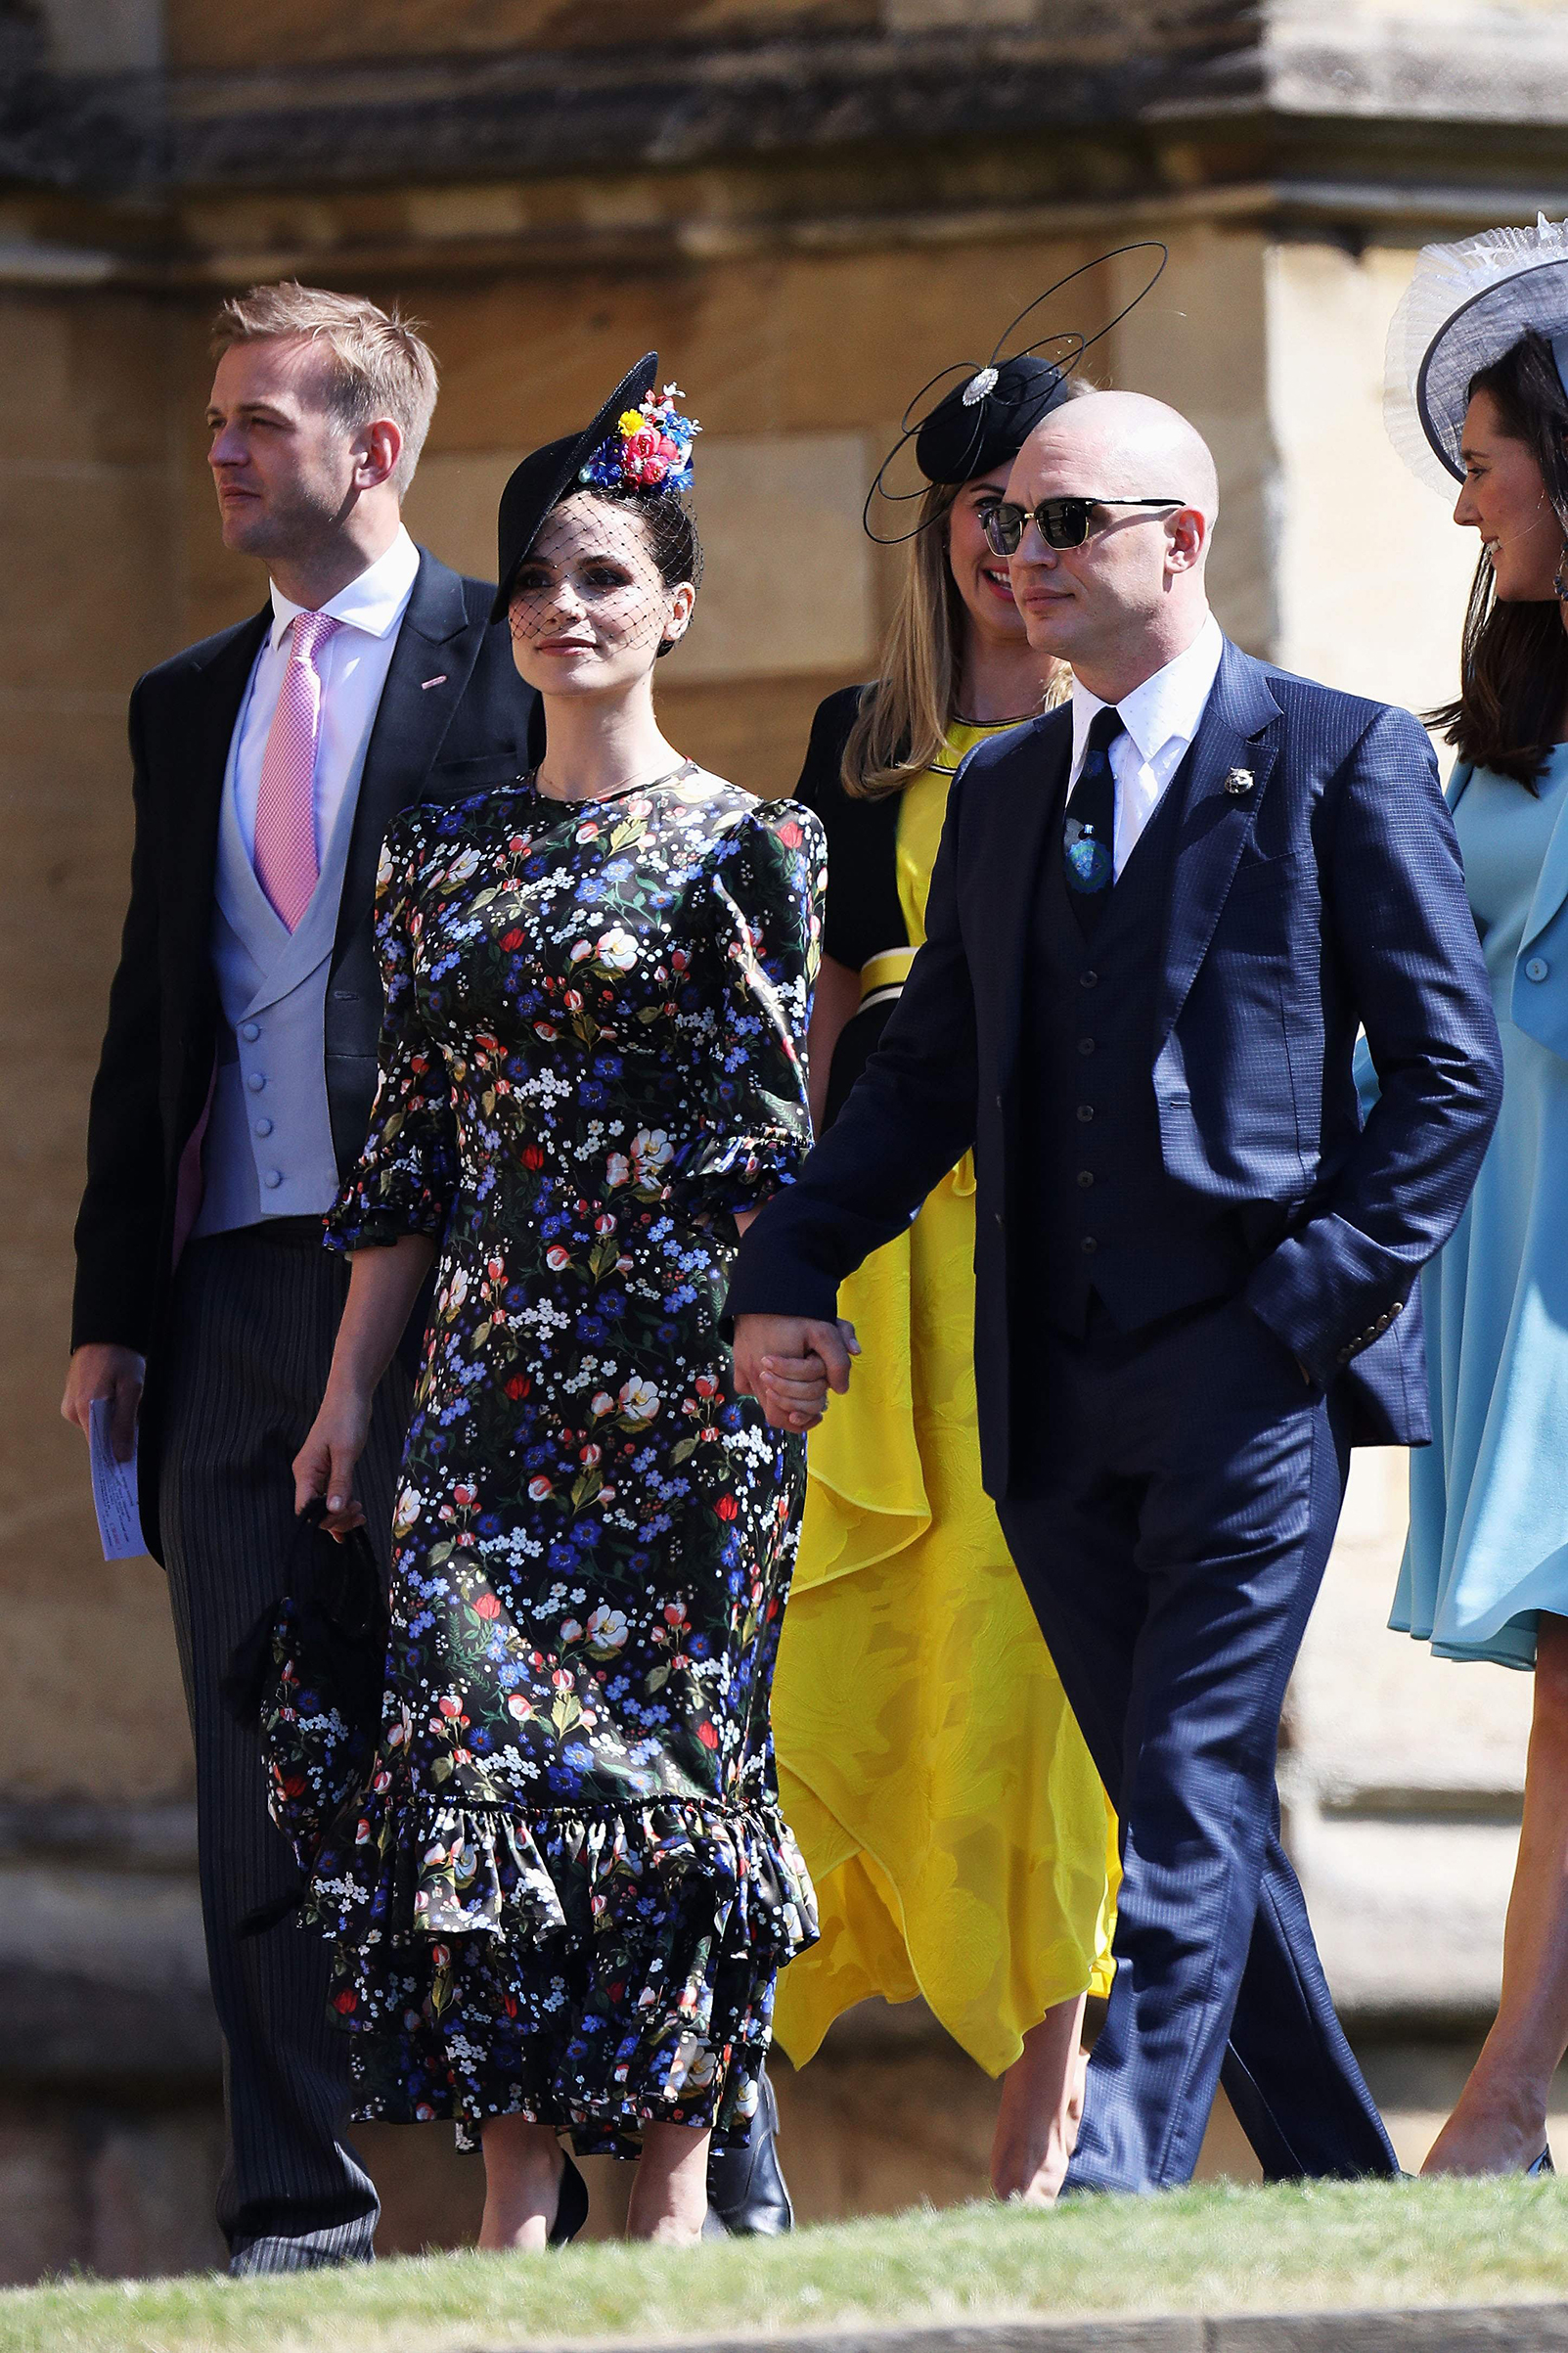 Tom Hardy and Charlotte Riley arrive for the wedding ceremony of Britain's Prince Harry, Duke of Sussex and Meghan Markle at St George's Chapel, Windsor Castle, in Windsor, on May 19, 2018.